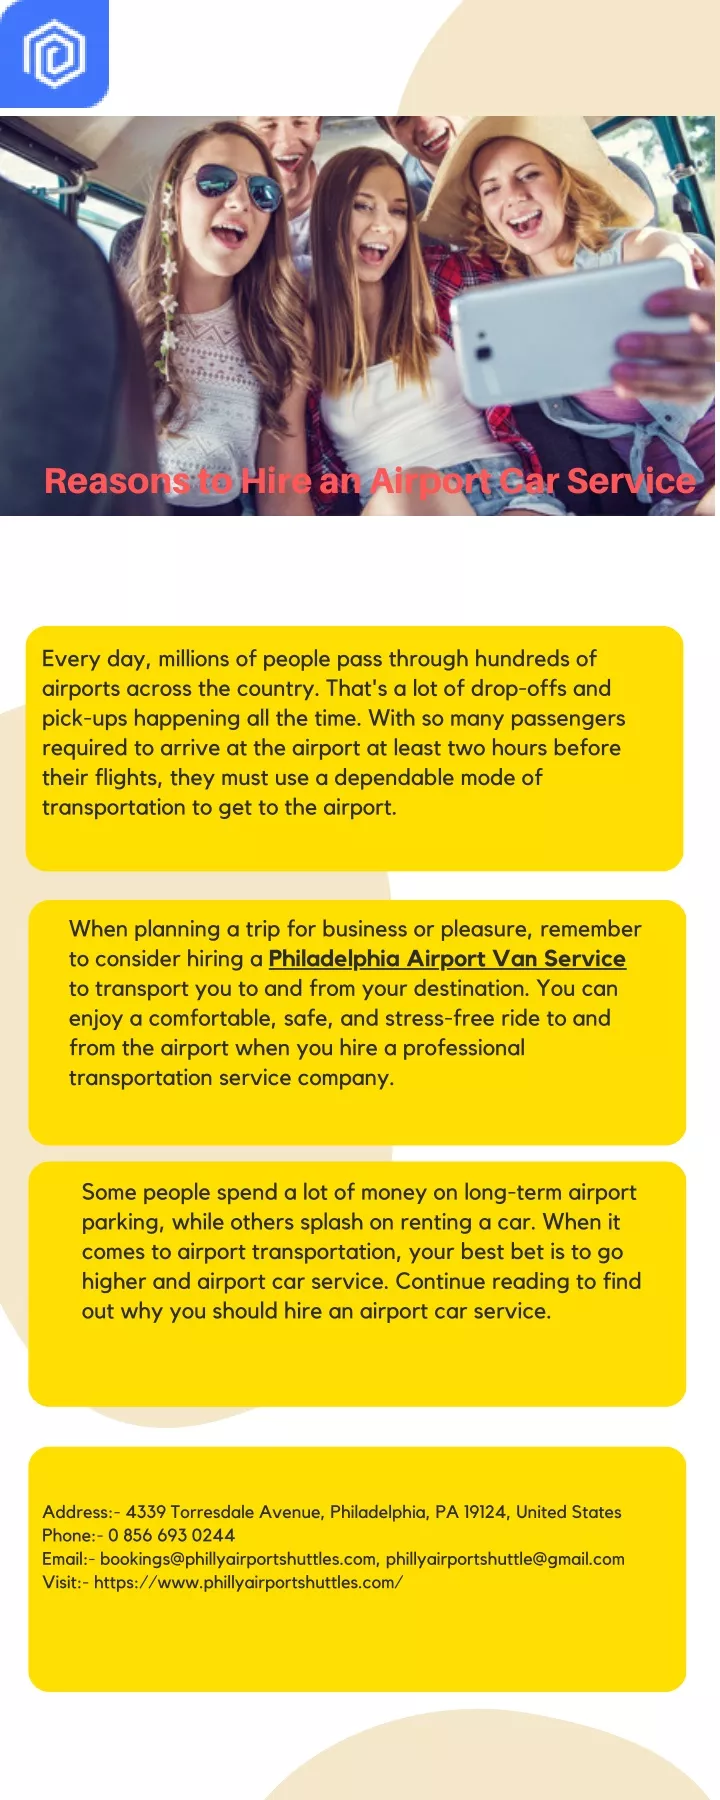 reasons to hire an airport car service